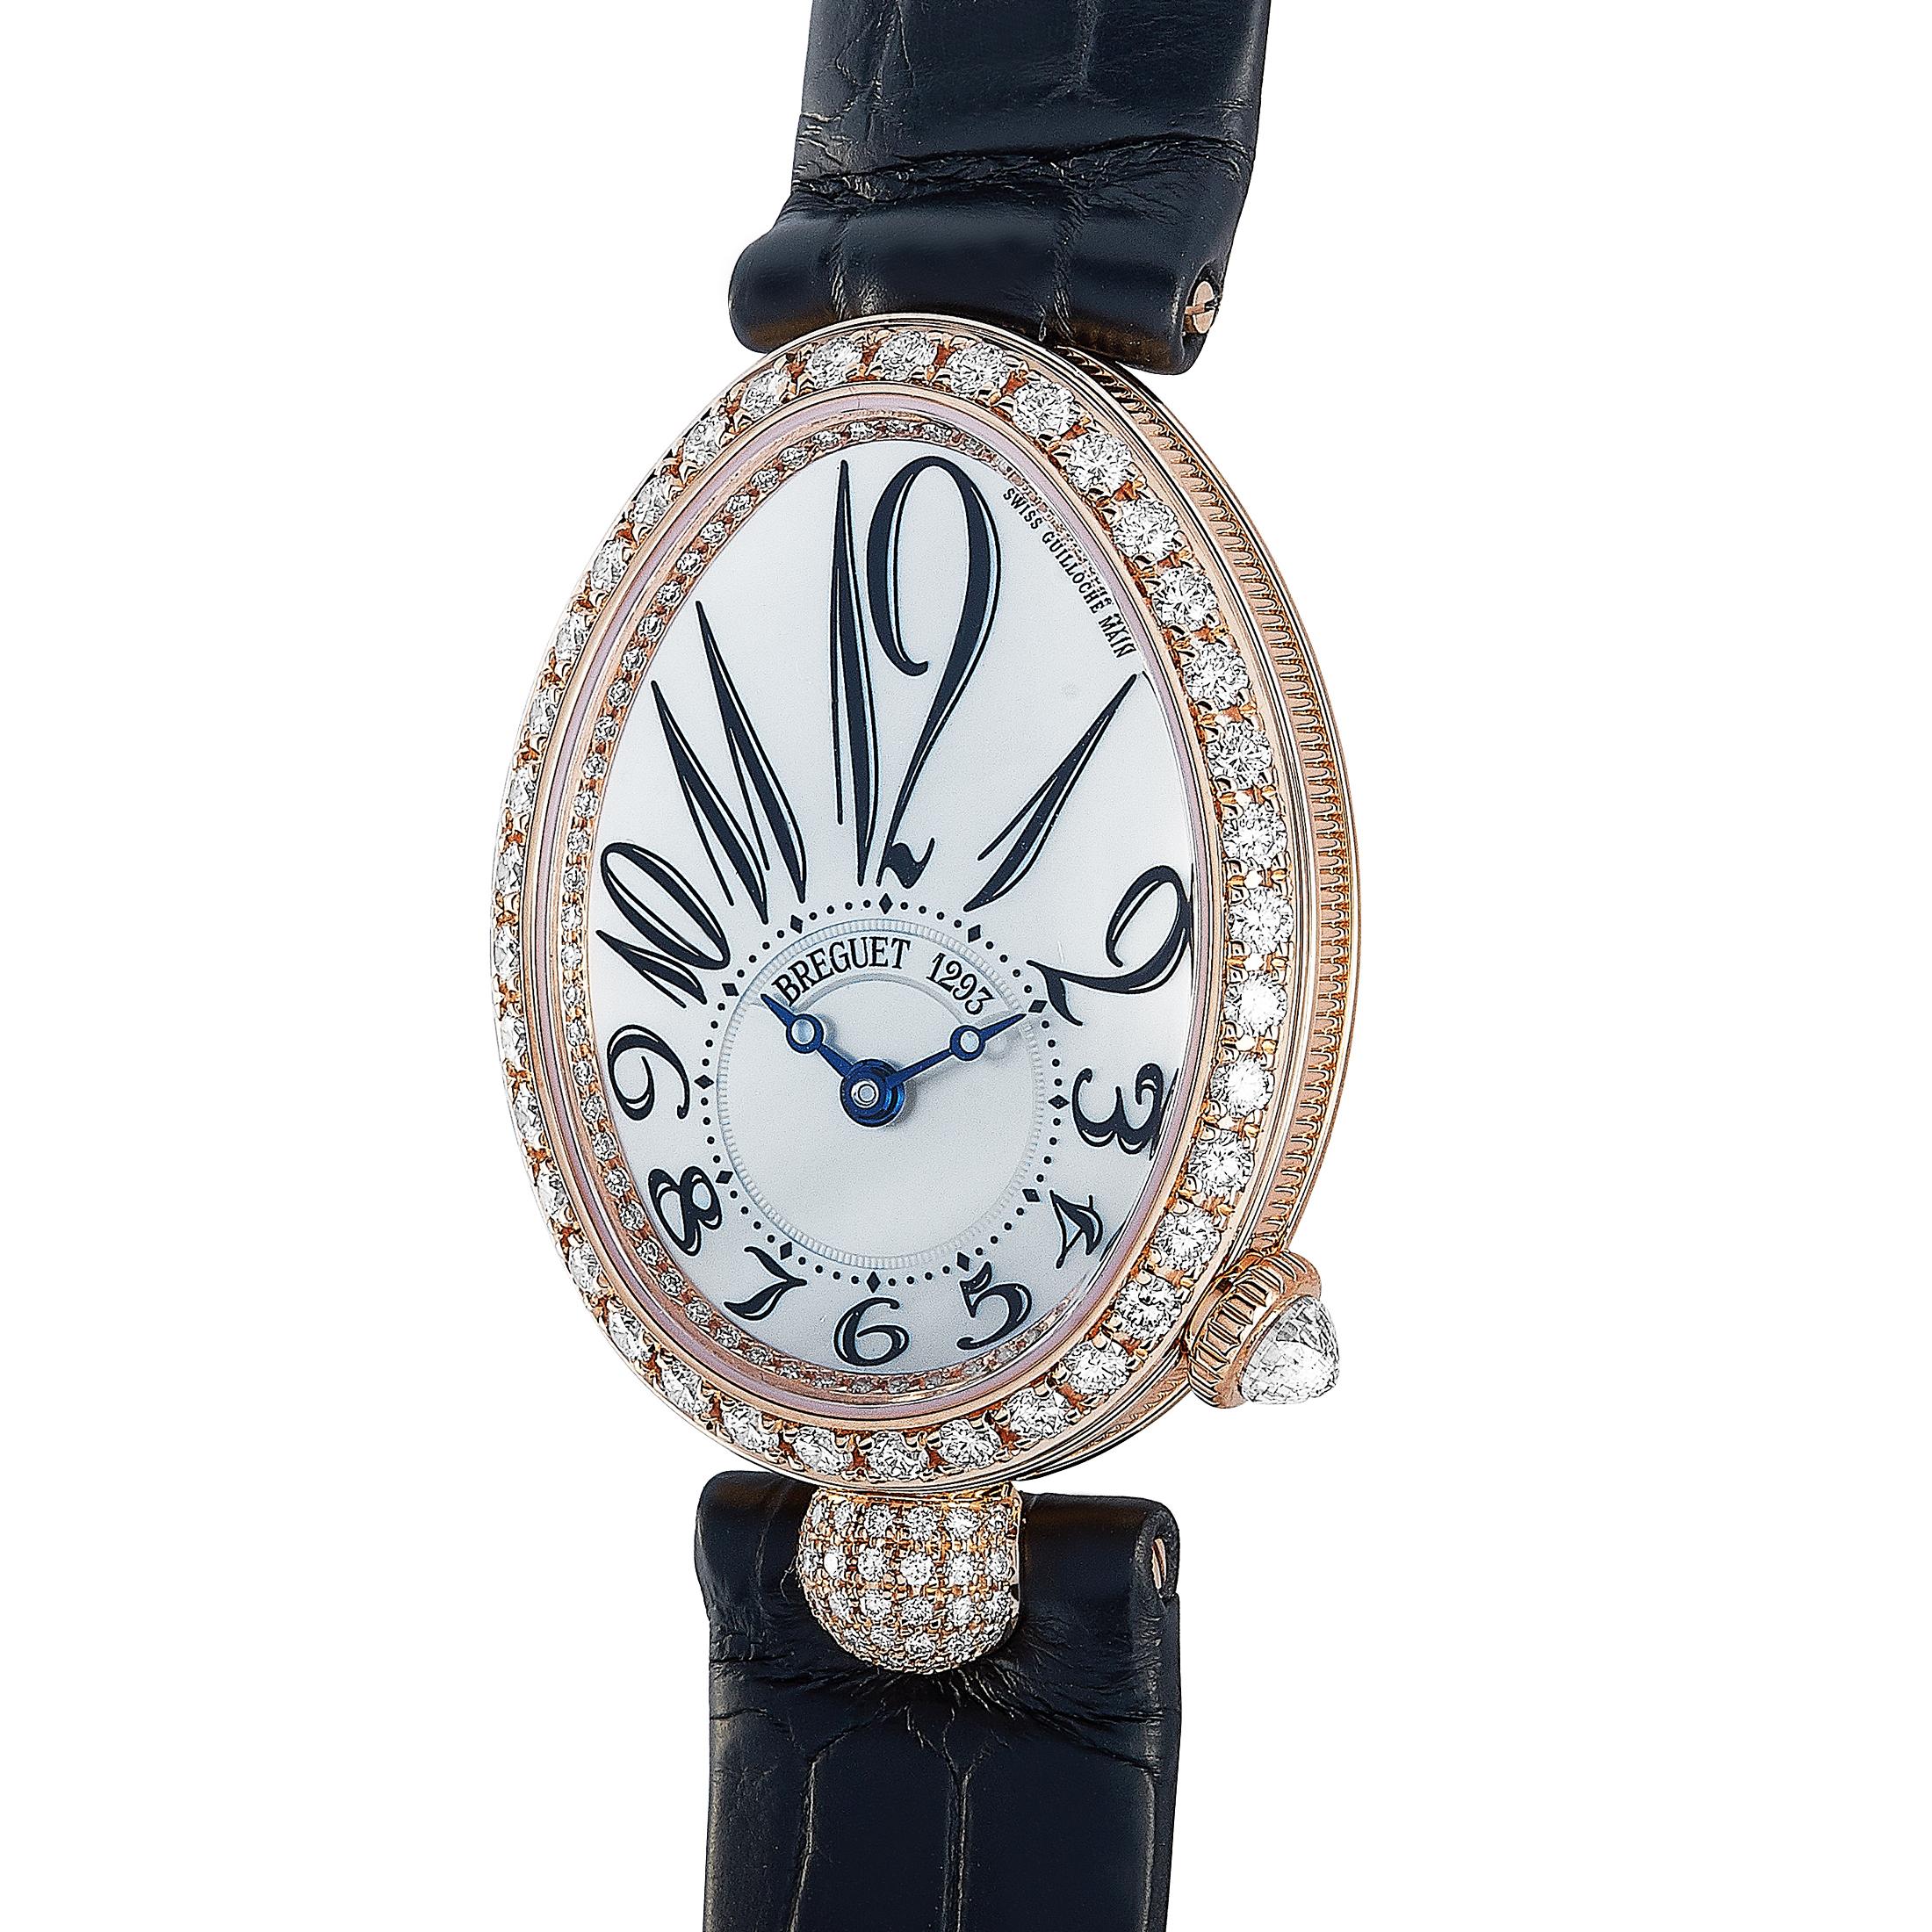 The Breguet Reine de Naples 8928 watch, reference number 8928BR/5W/944 DD0D, is presented within the sublime “Reine de Naples” collection.

This timepiece boasts a diamond-set 18K rose gold case that is mounted onto a black leather strap, secured on